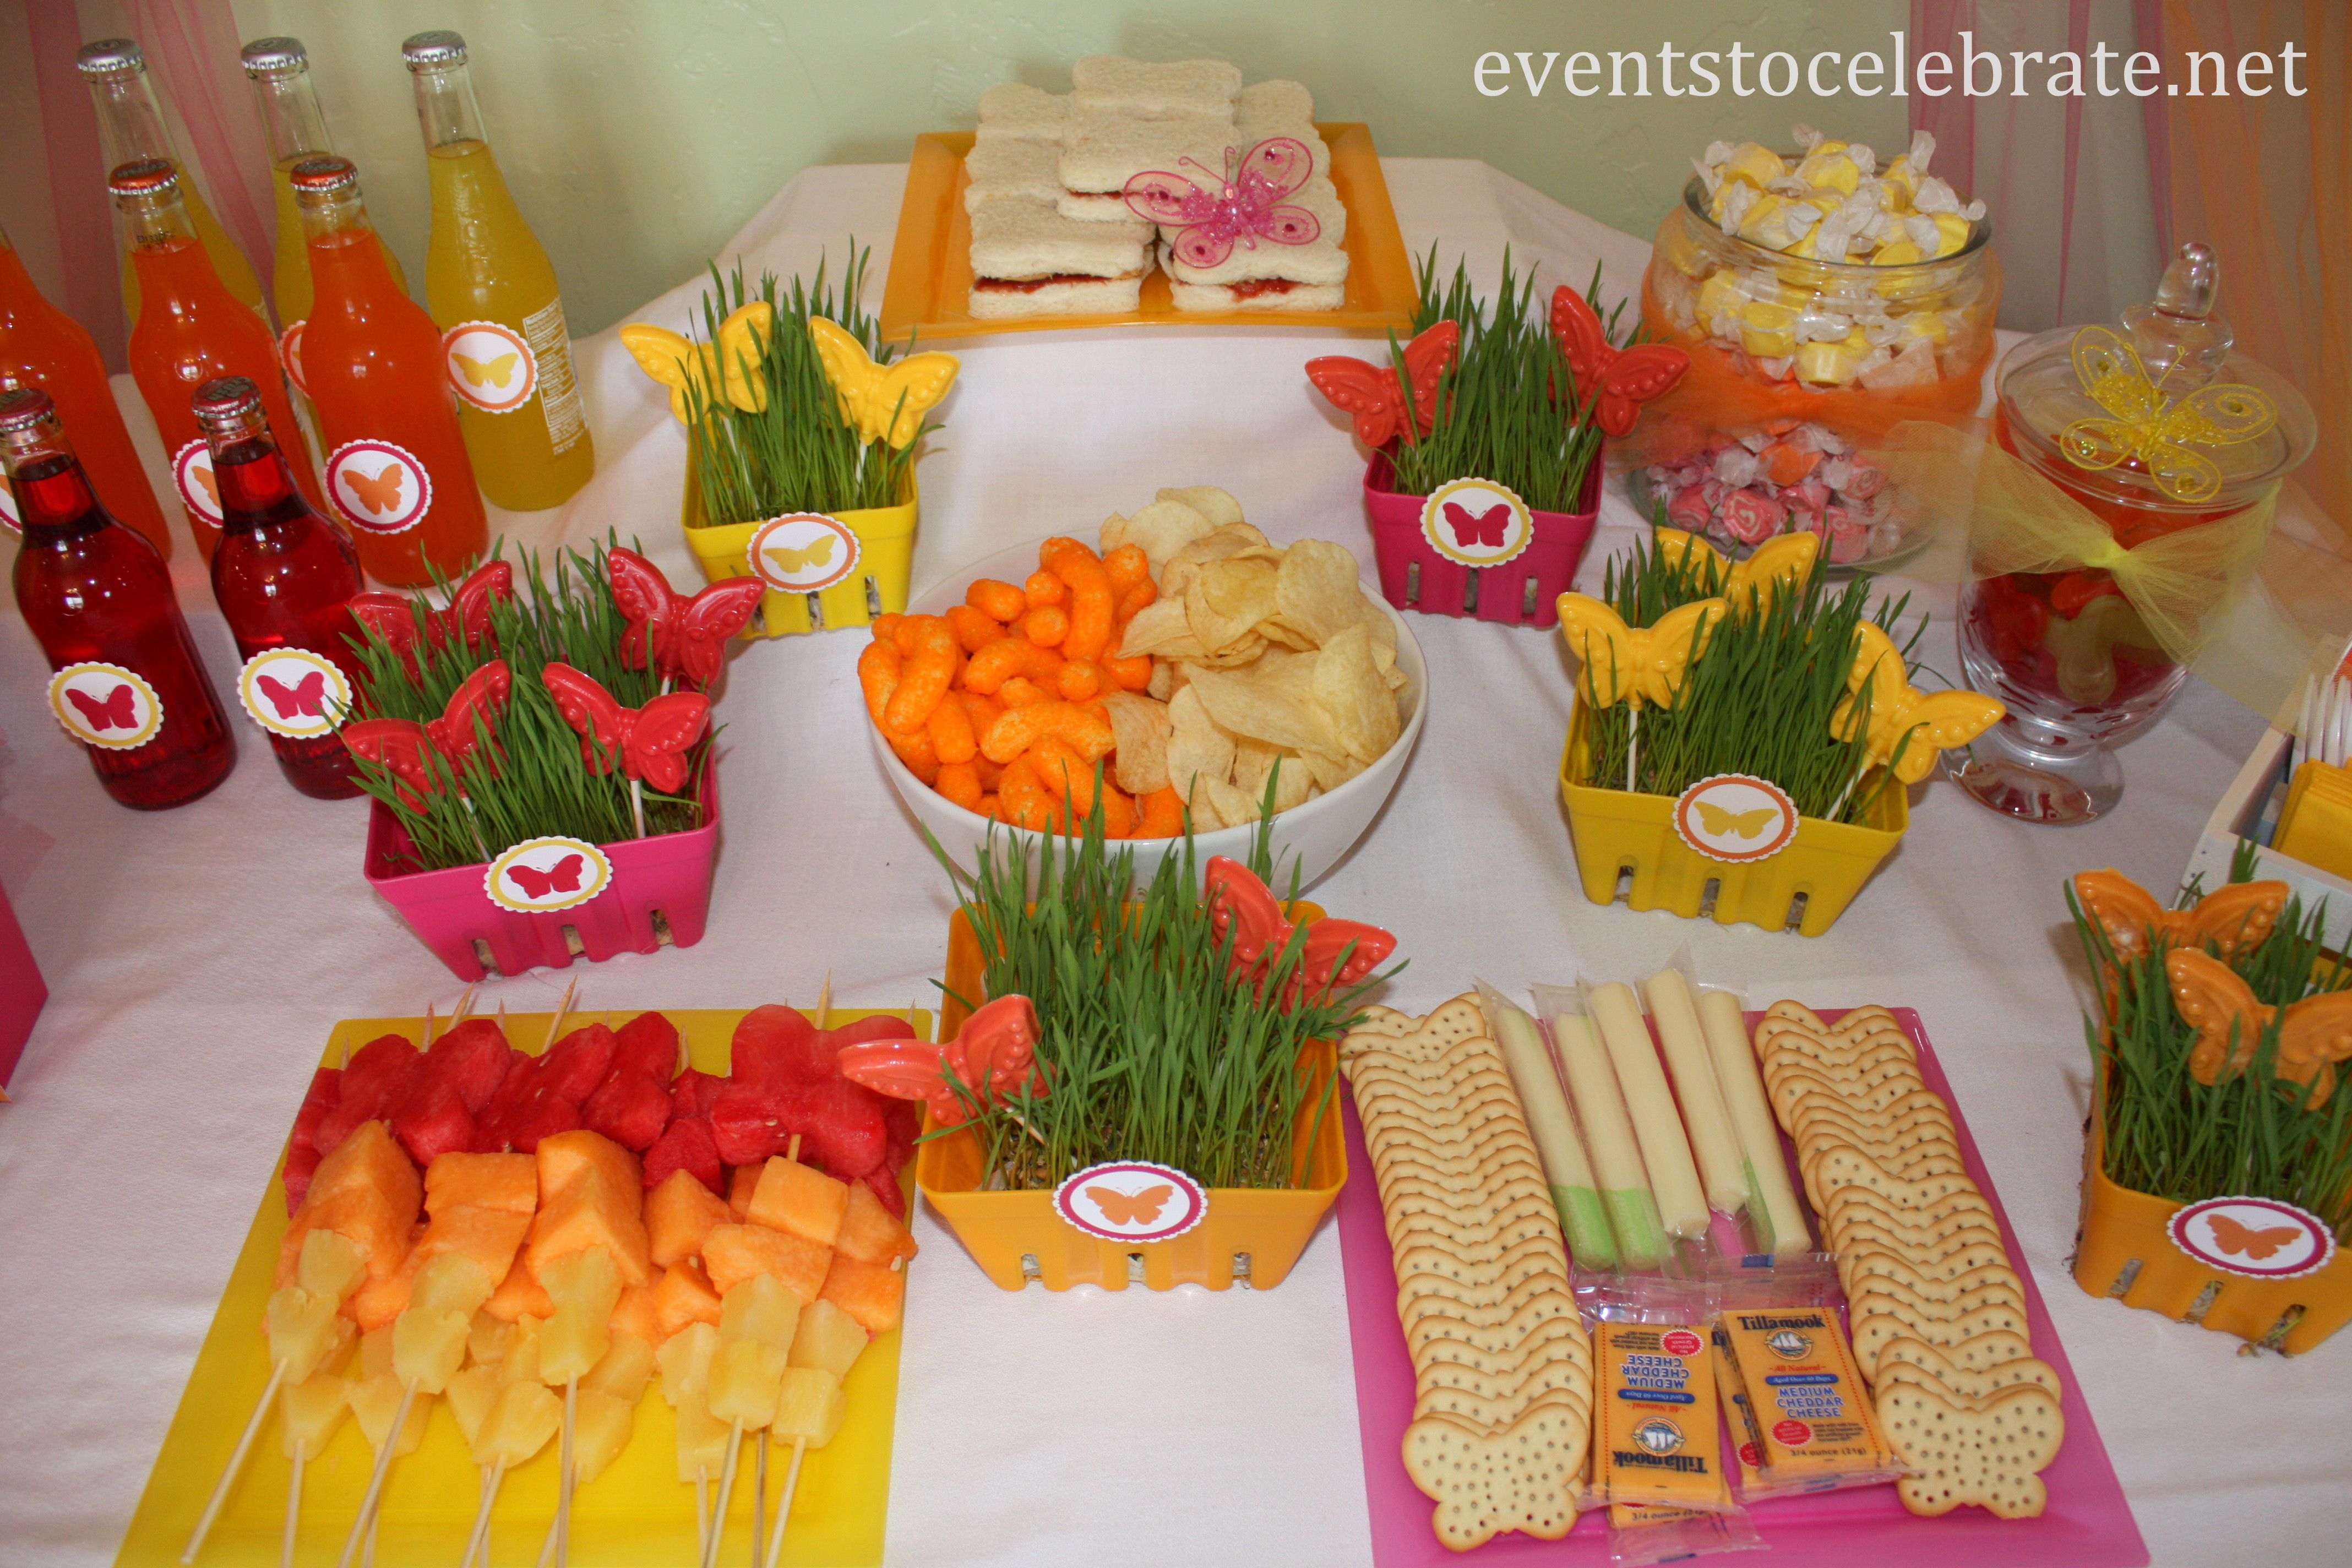 Anniversary Party Food Ideas
 centerpieces Archives events to CELEBRATE